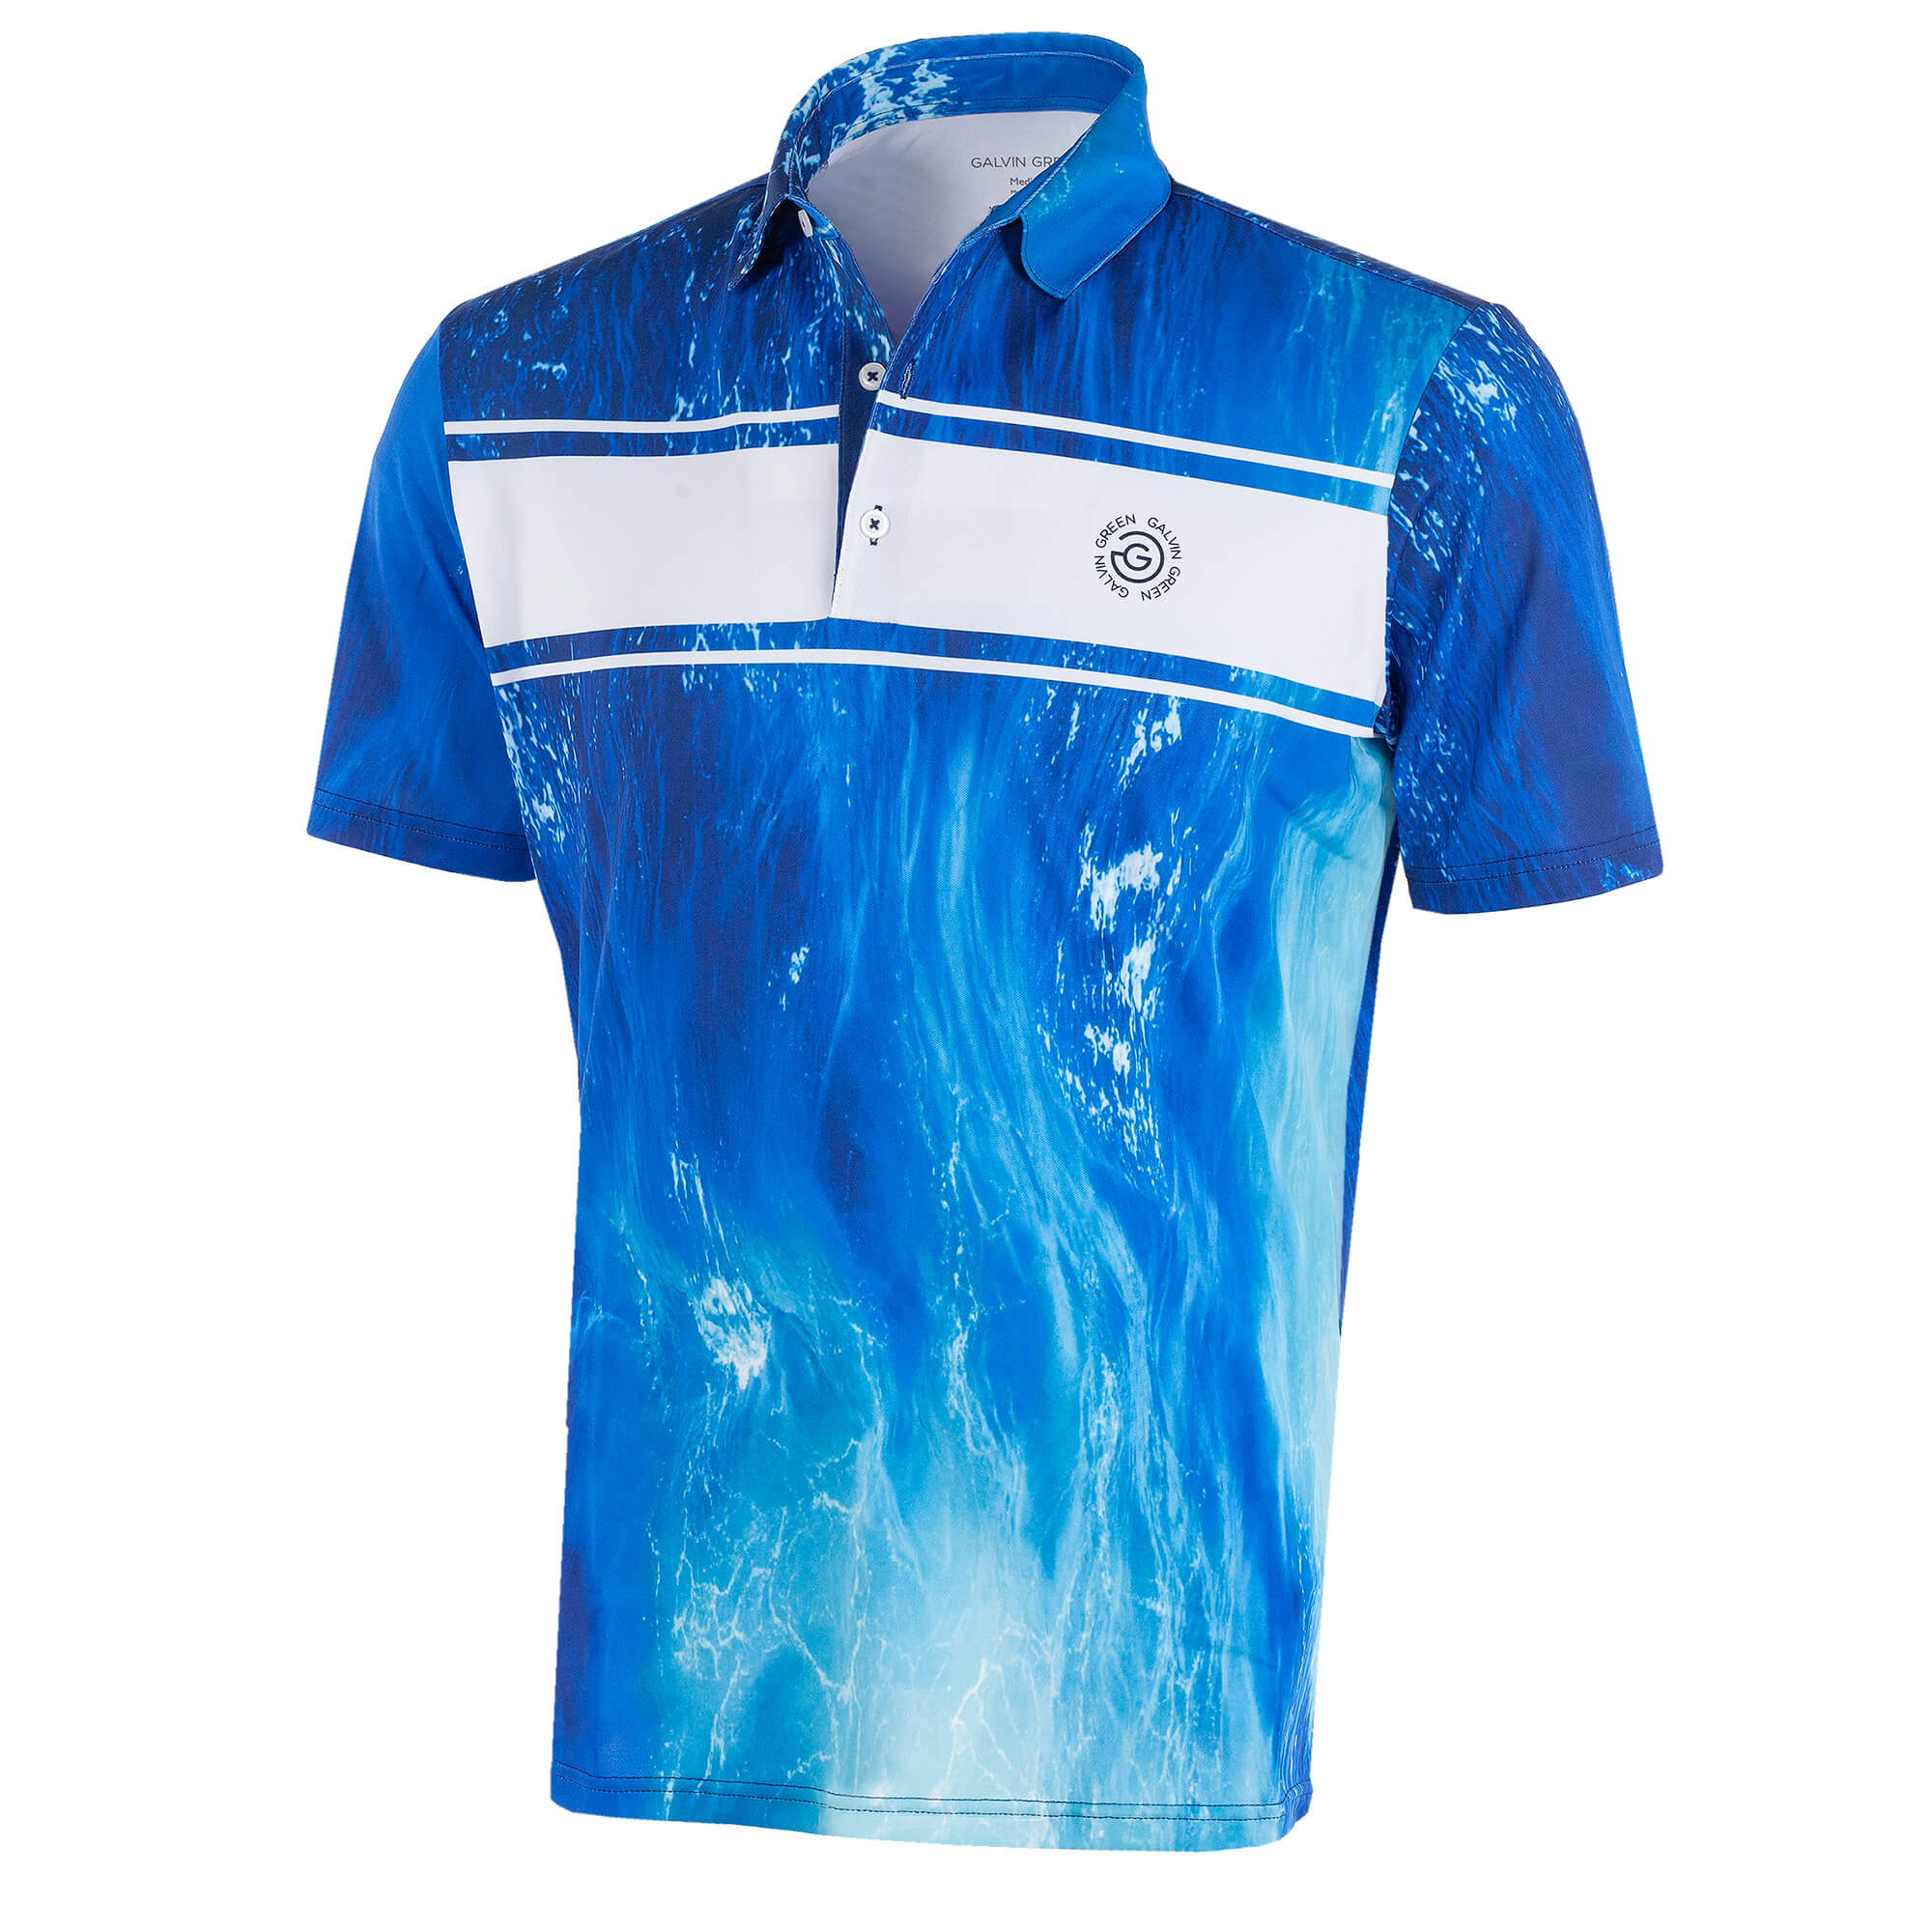 Galvin Green Manfred Limited Edition Polo Shirt White/Blue | Scottsdale ...